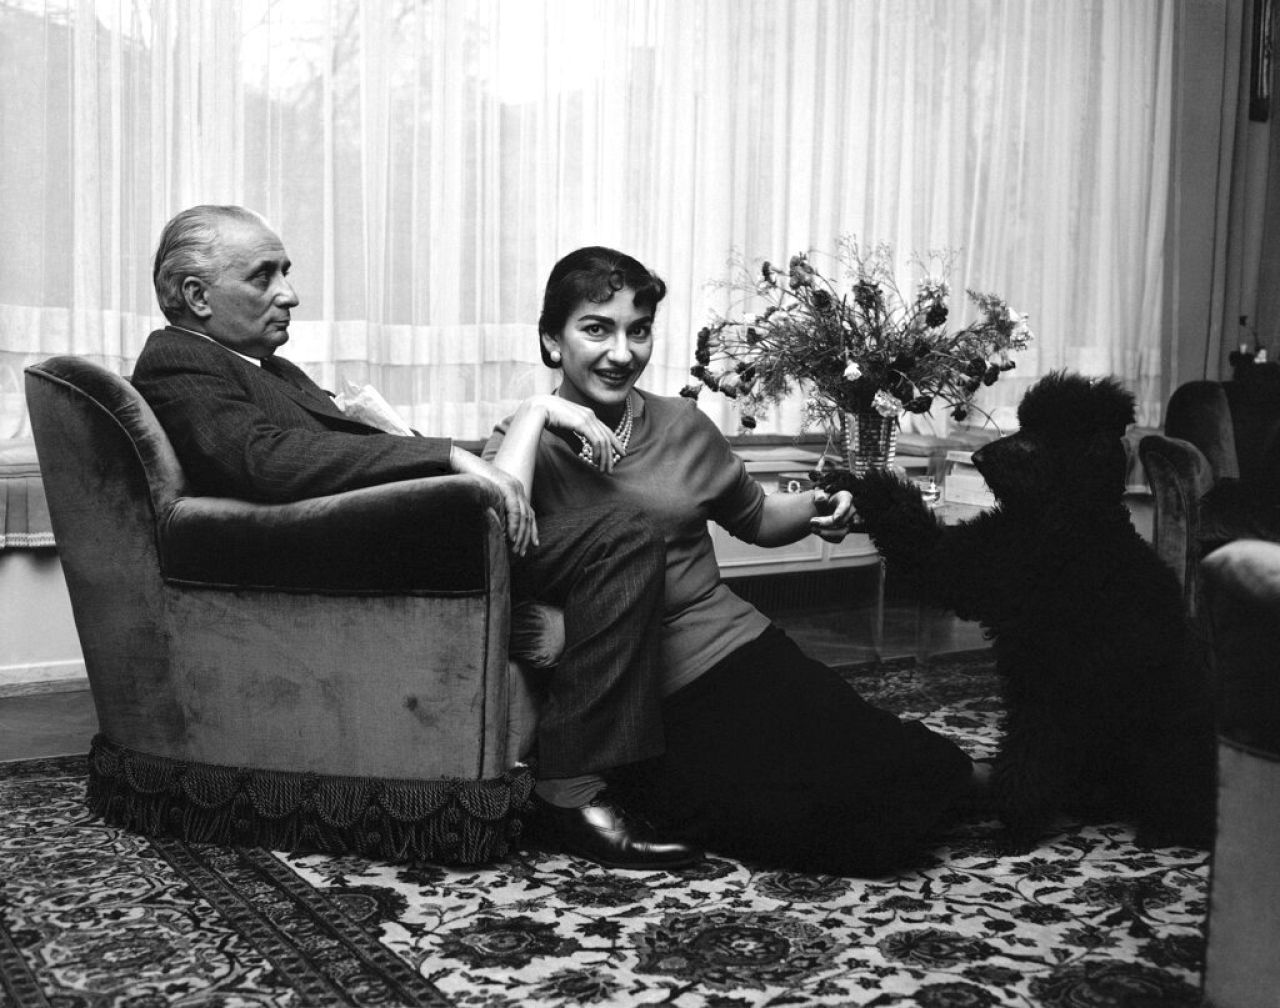 Renowned soprano Maria Meneghini-Callas plays with her poodle at home in Milan on Nov. 24, 1955, while her husband Giovanni Battista Meneghini, watches.